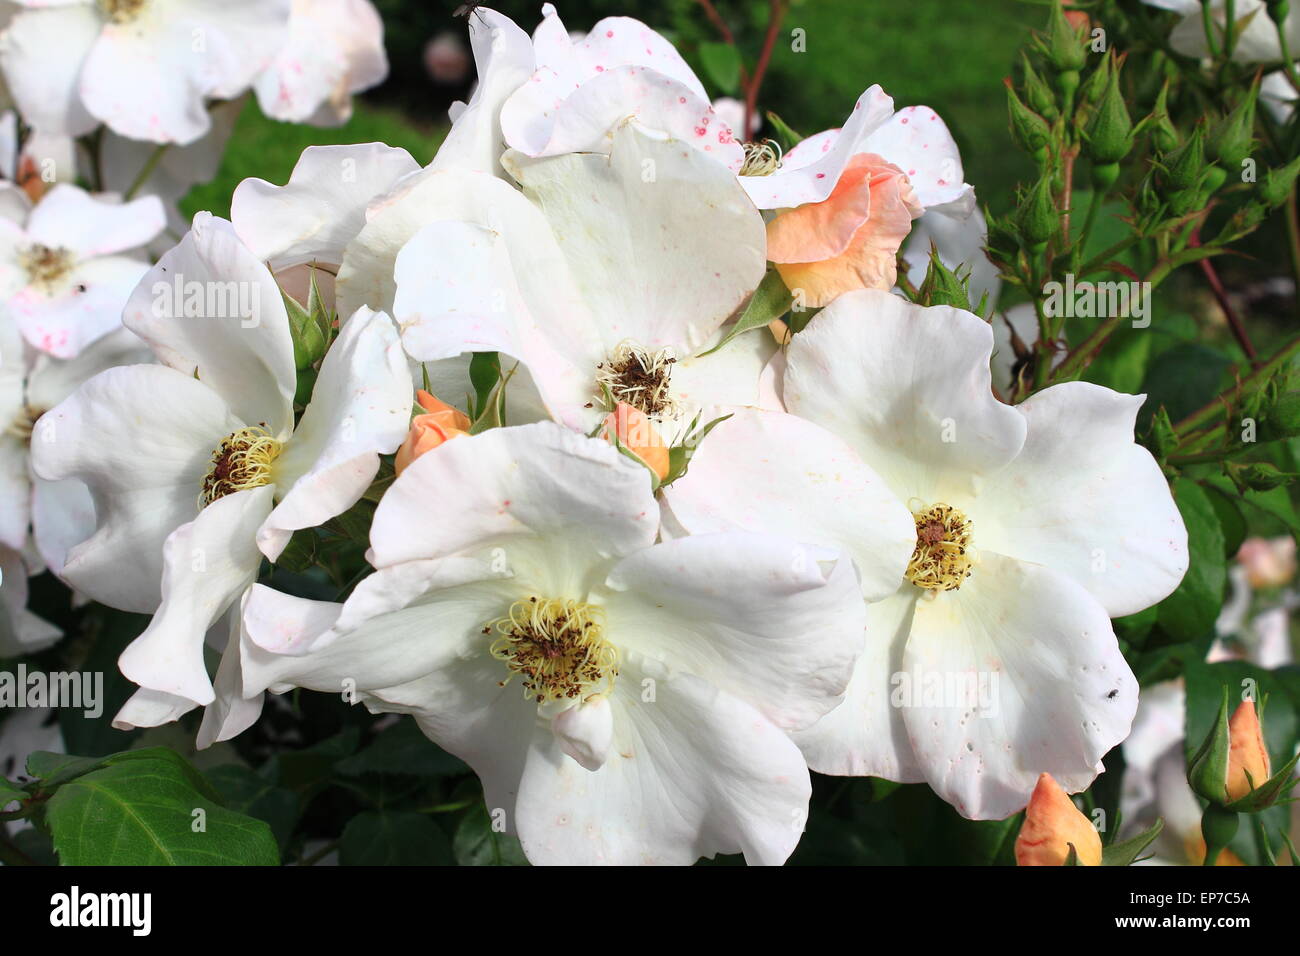 White dog rose flower with yellow pistils Stock Photo